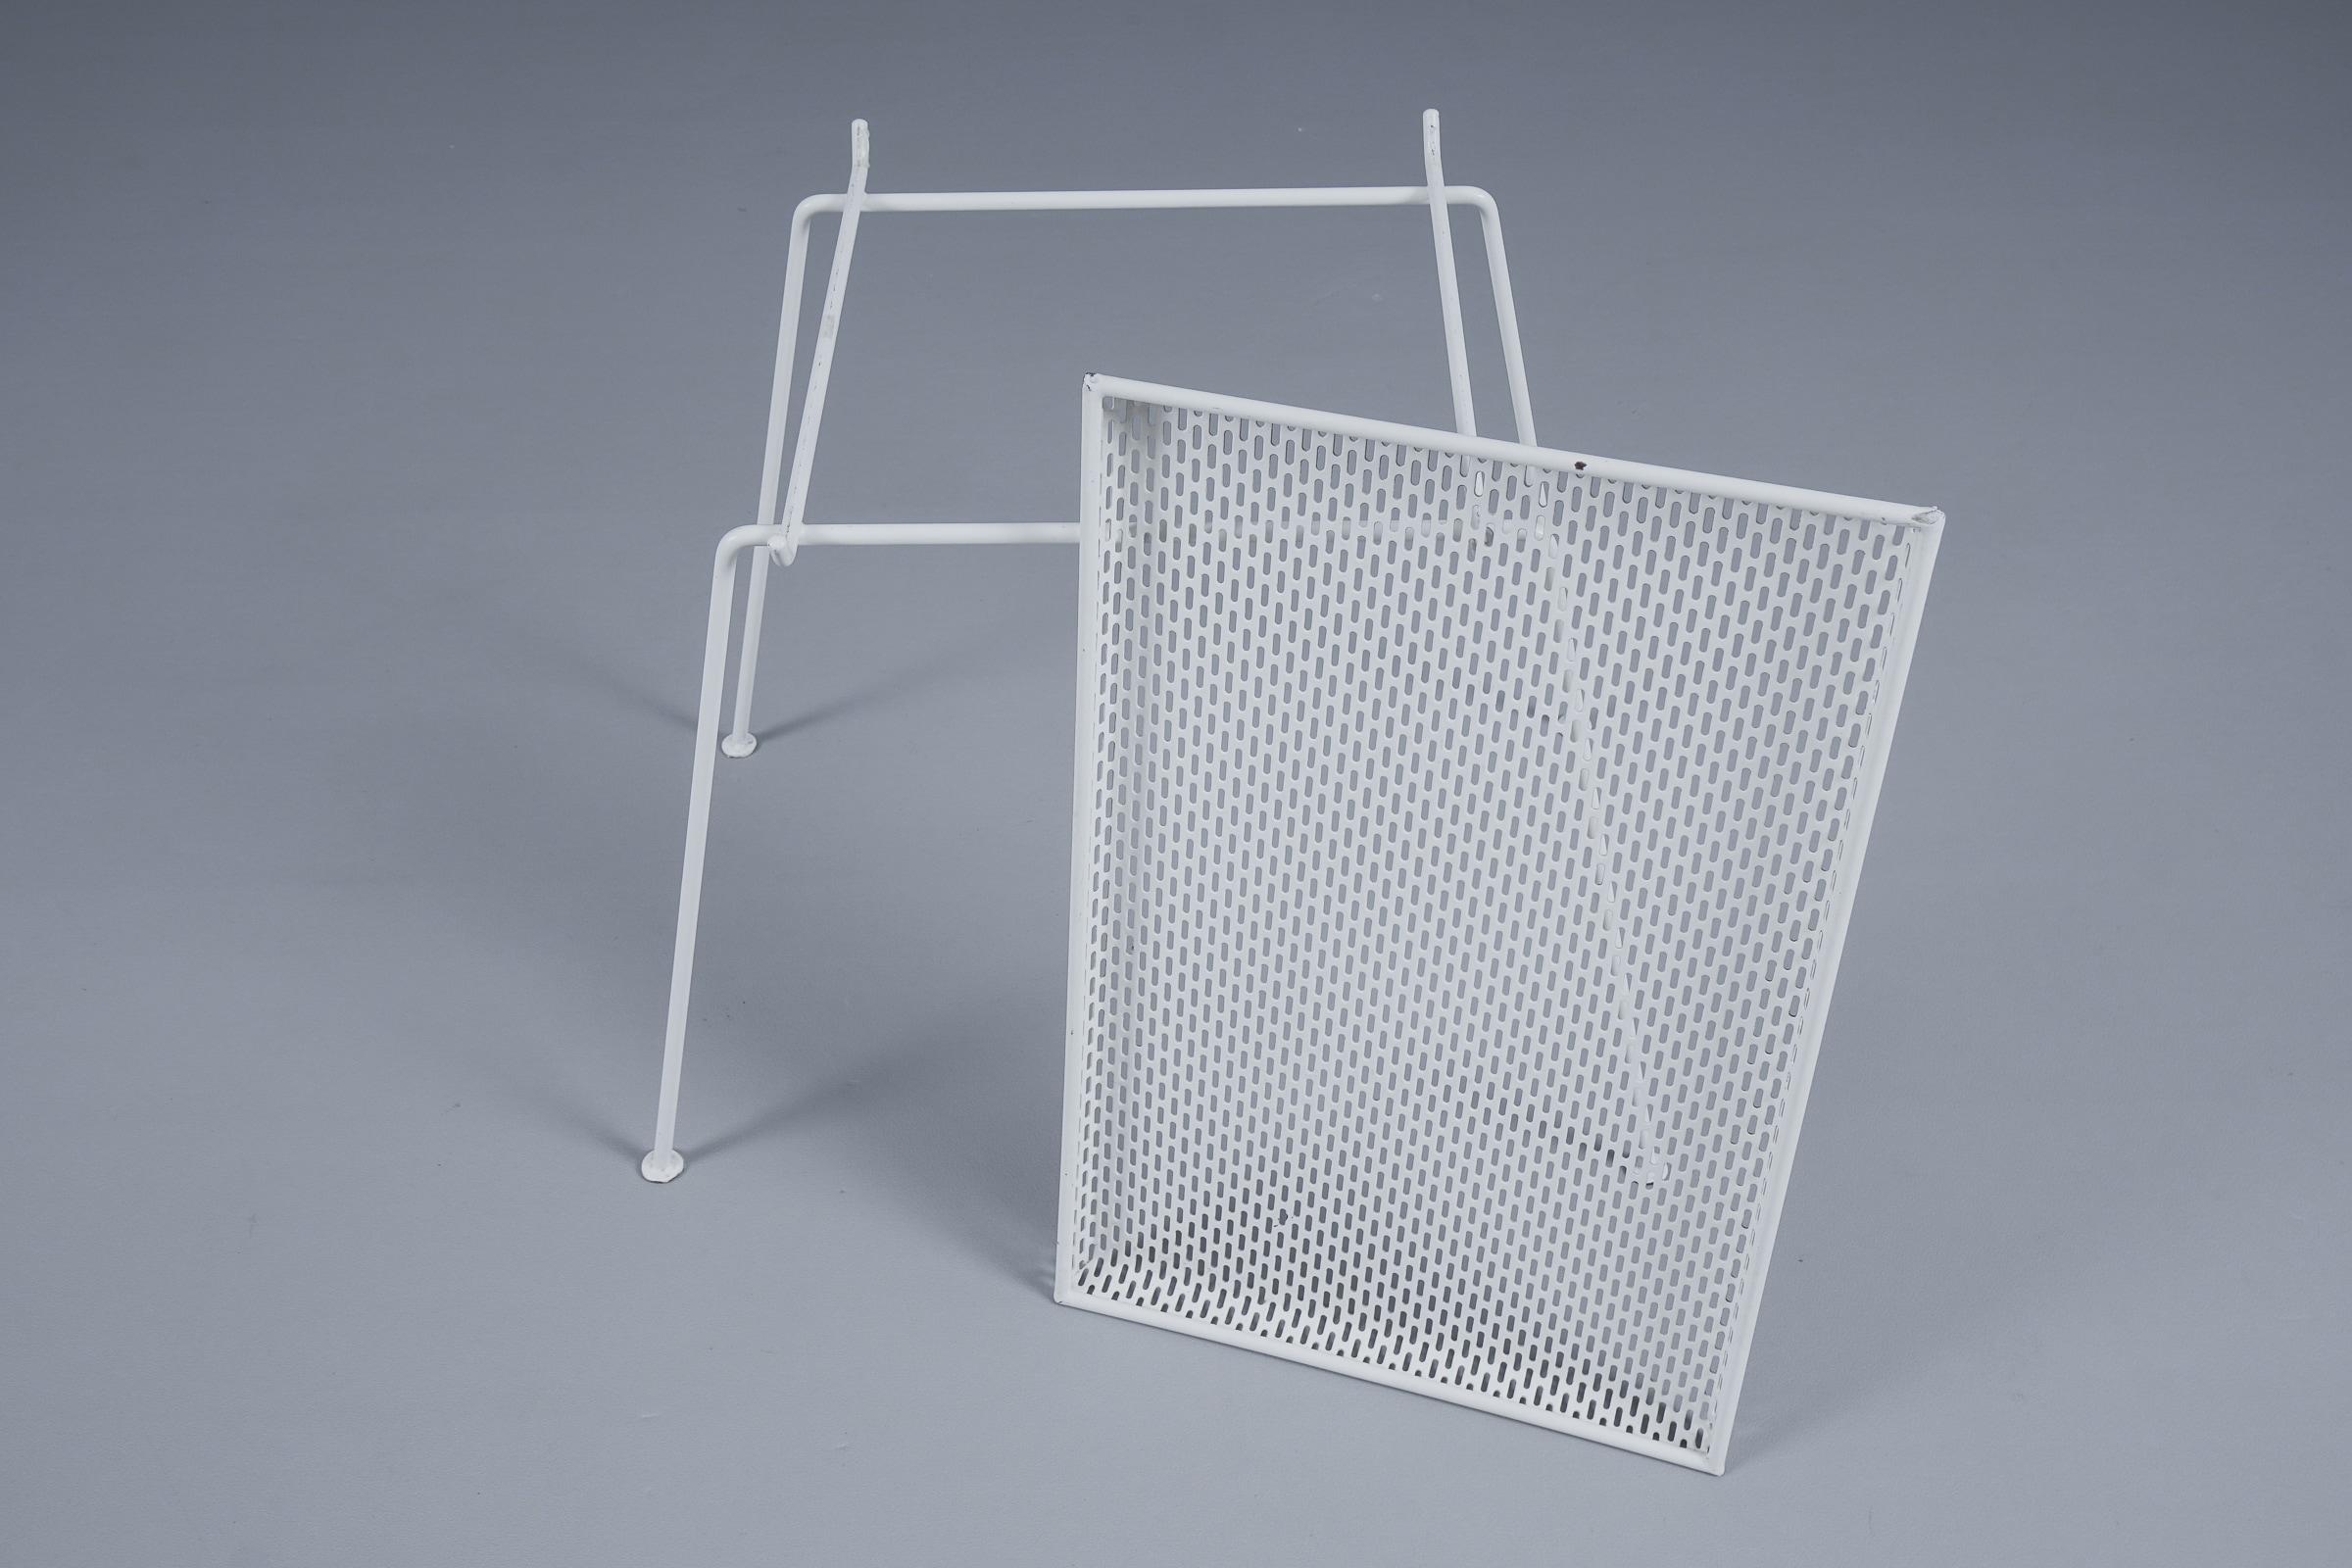 French Side Table in Perforated White Lacquered Metal With Removable Tray, 1950s For Sale 3